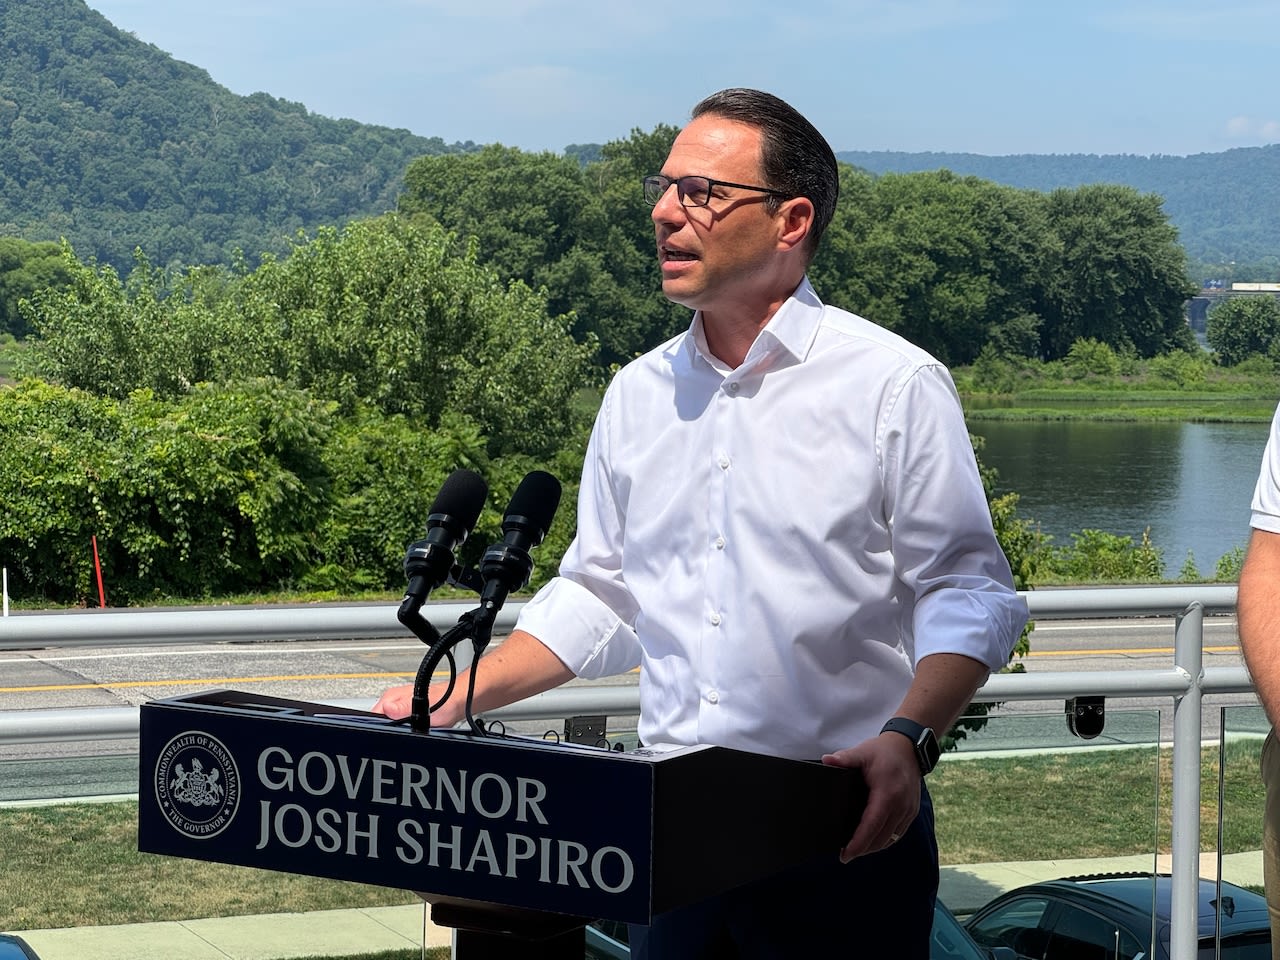 What’s Biden’s withdrawal mean for Pa. and Gov. Shapiro?